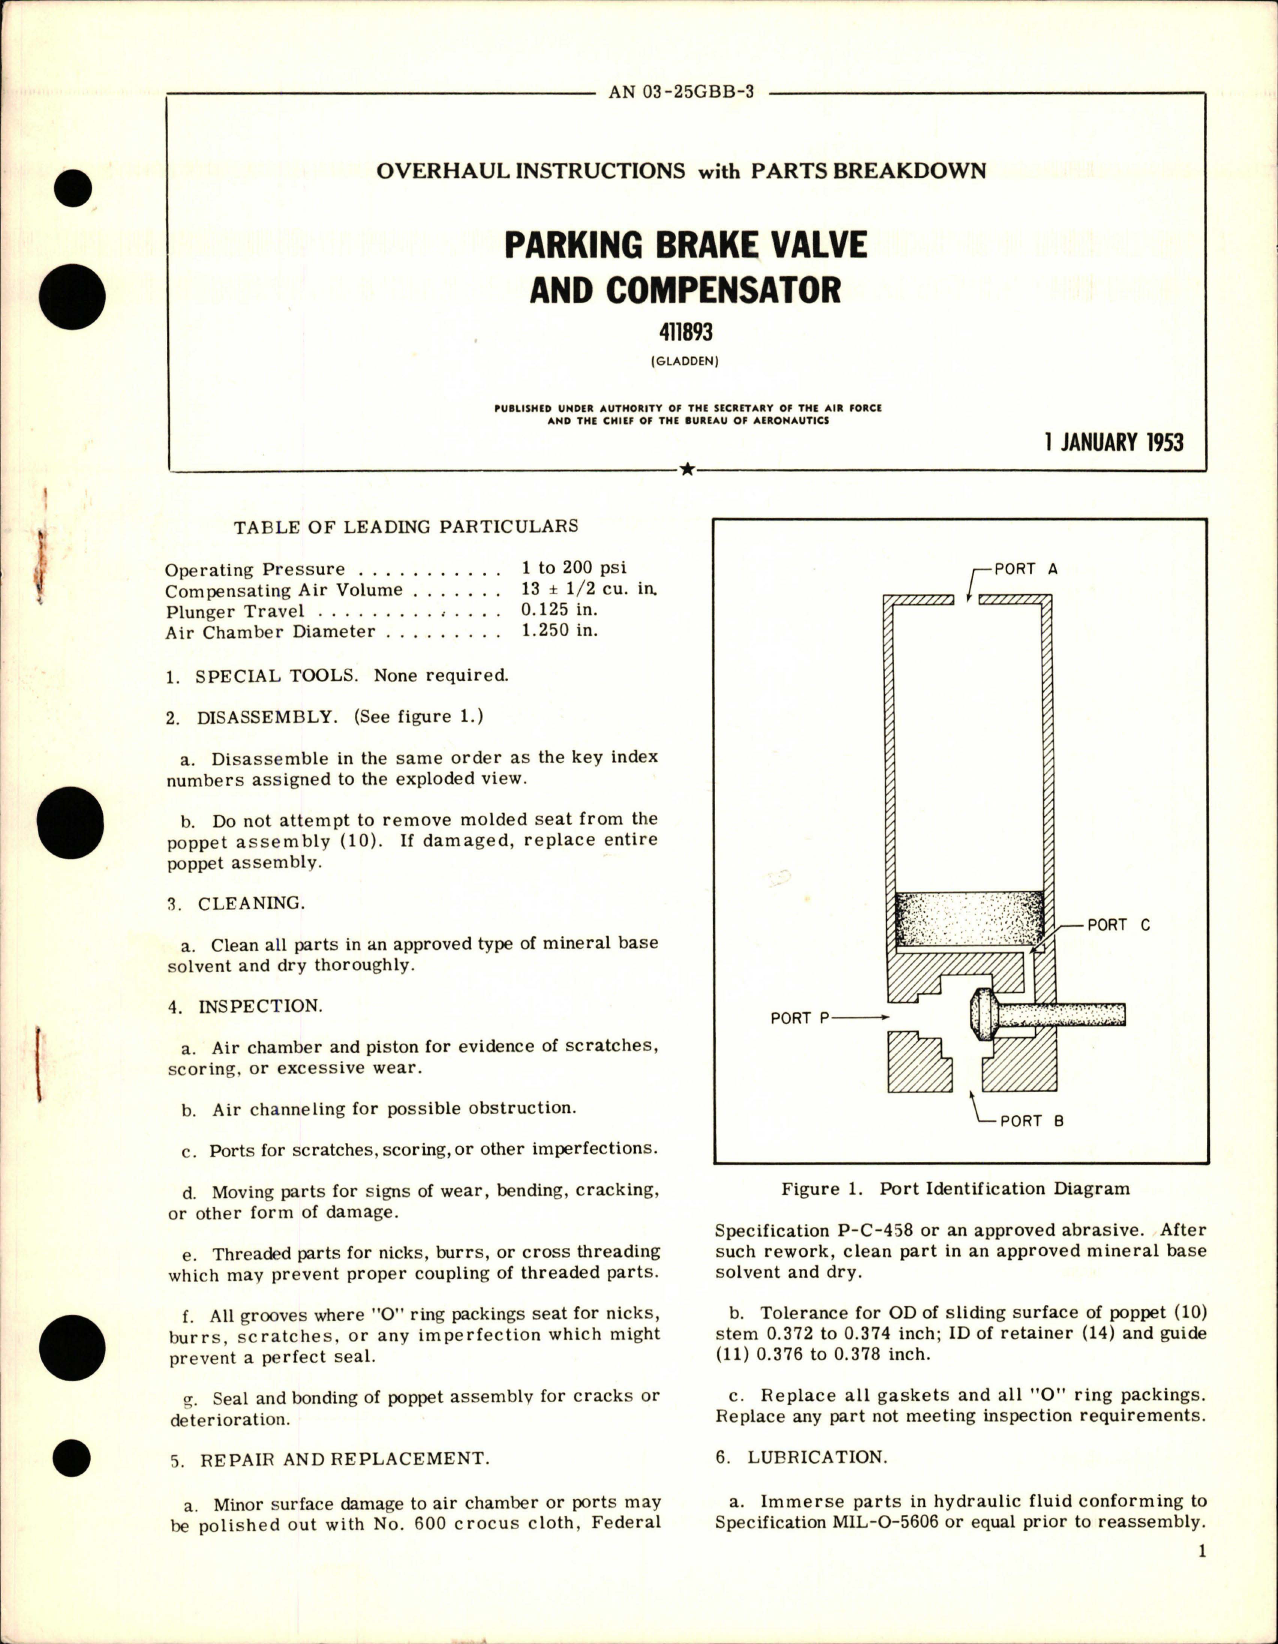 Sample page 1 from AirCorps Library document: Overhaul Instructions with Parts Breakdown for Parking Brake Valve and Compensator - 411893